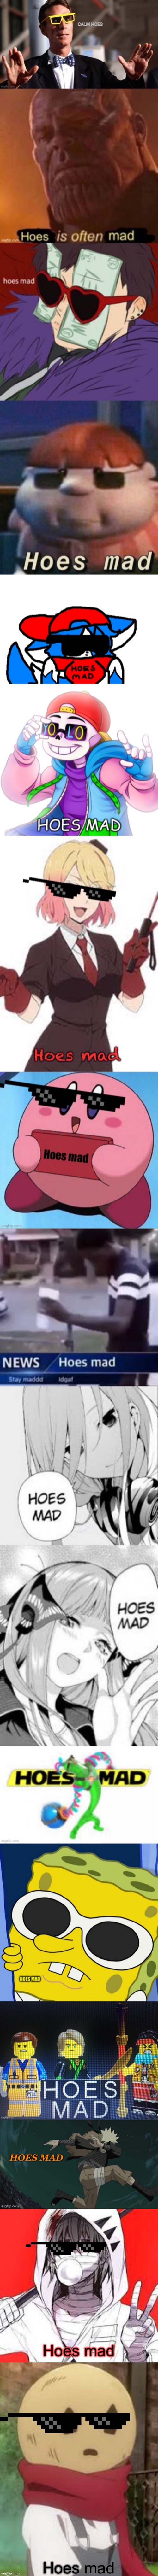 image tagged in zack hoes mad,eddie hoes mad | made w/ Imgflip meme maker